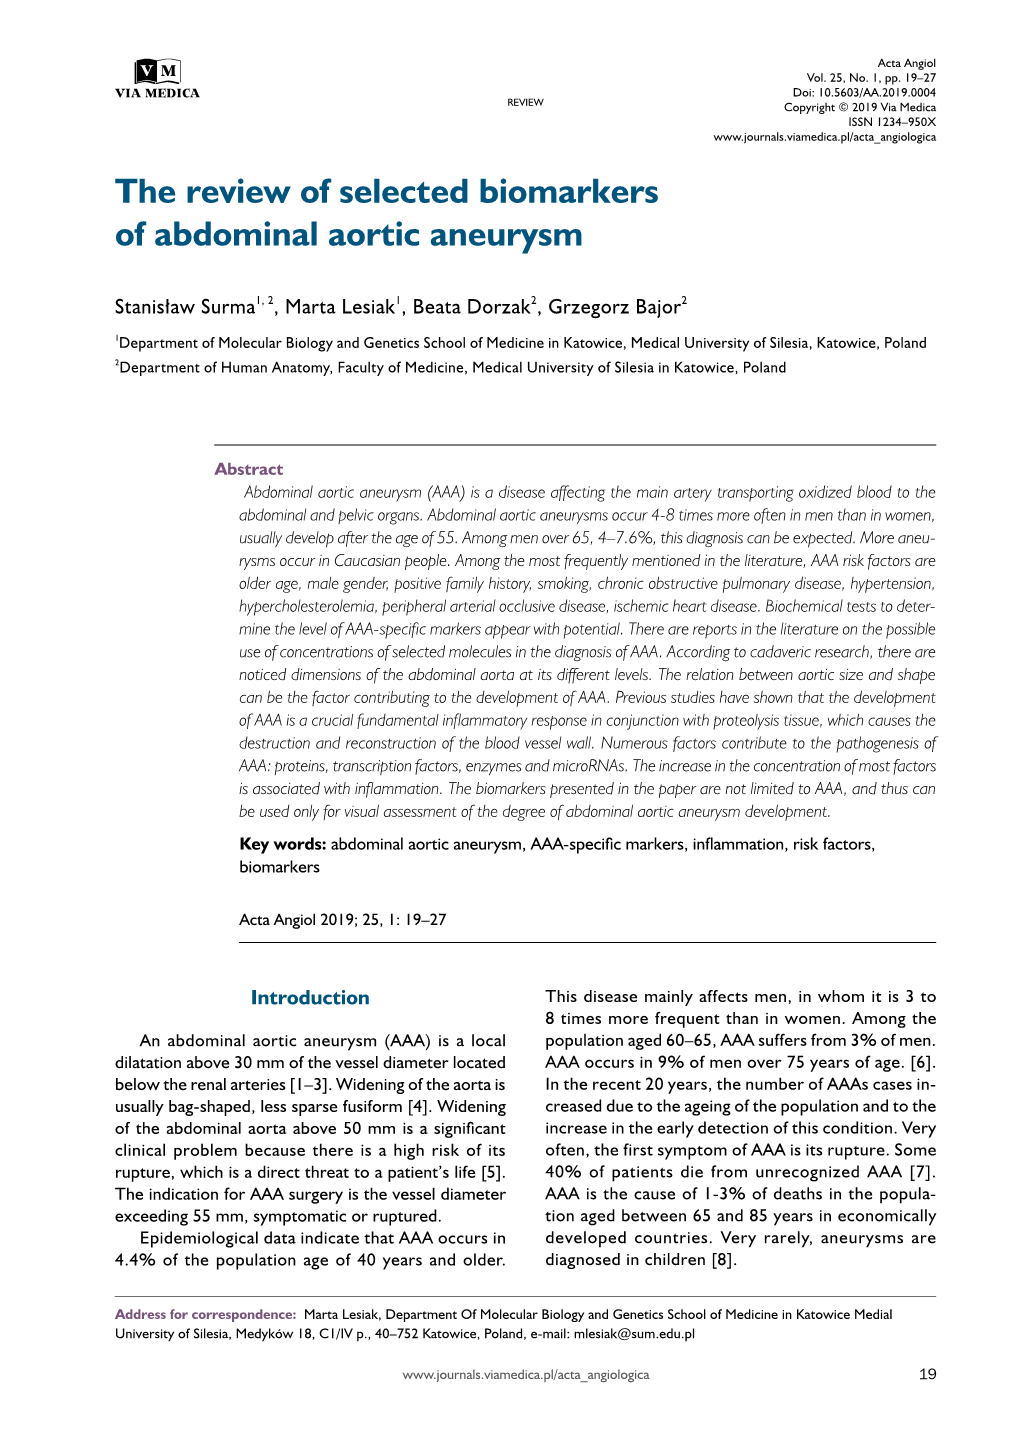 The Review of Selected Biomarkers of Abdominal Aortic Aneurysm